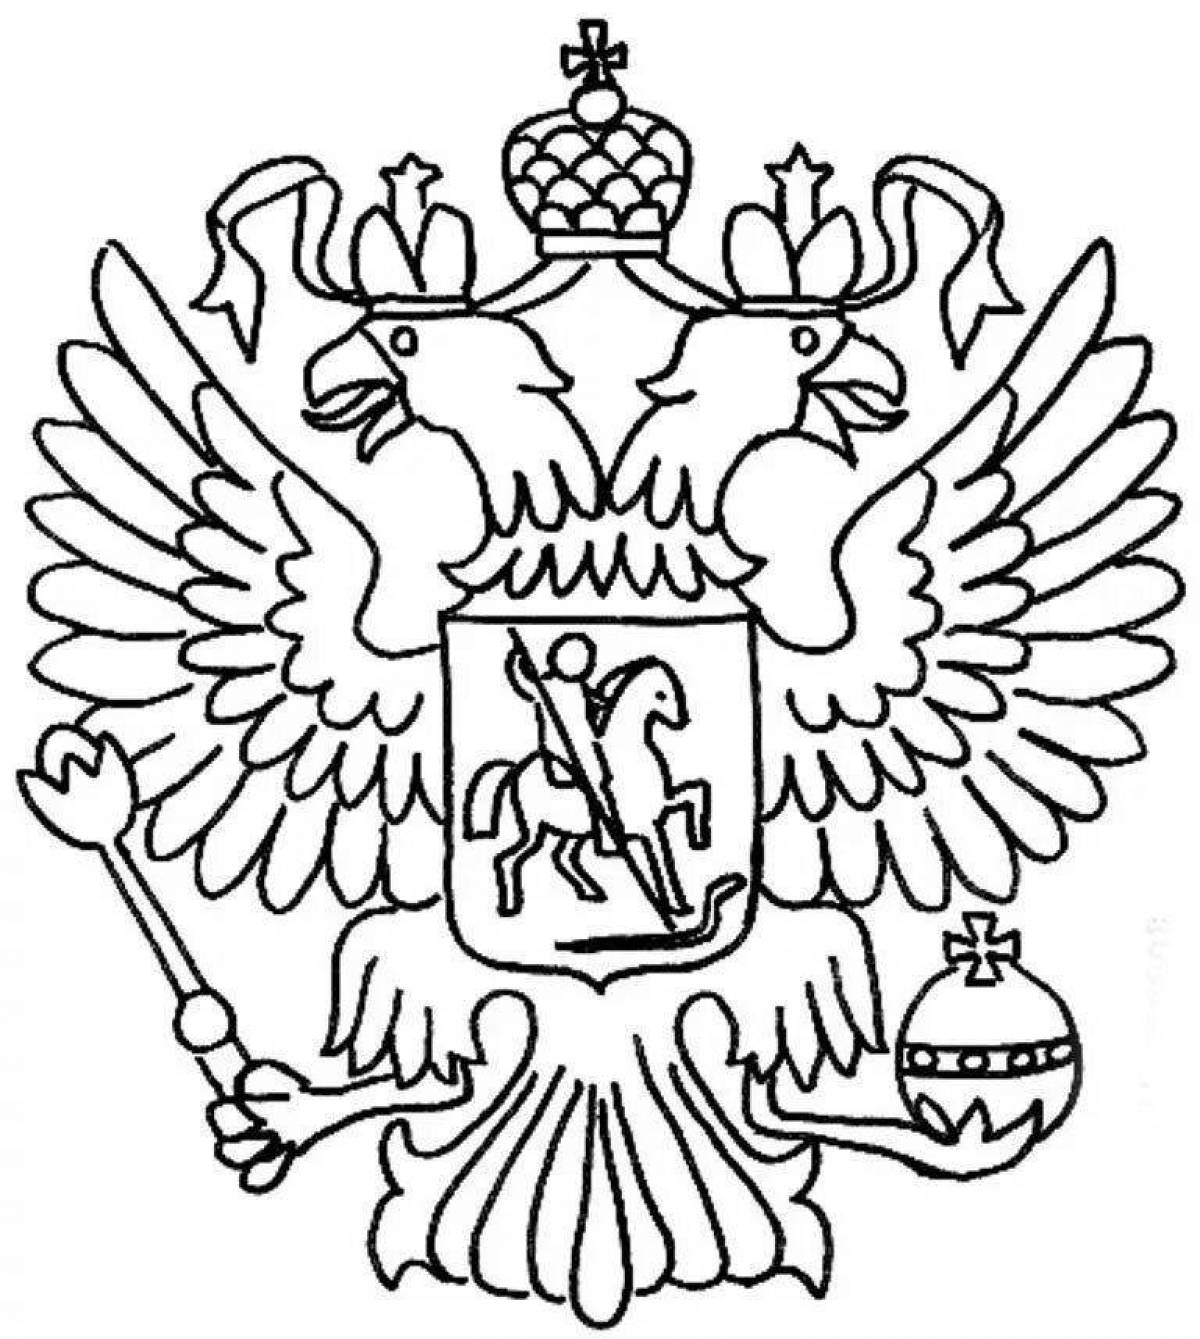 Glorious flag and coat of arms of Russia